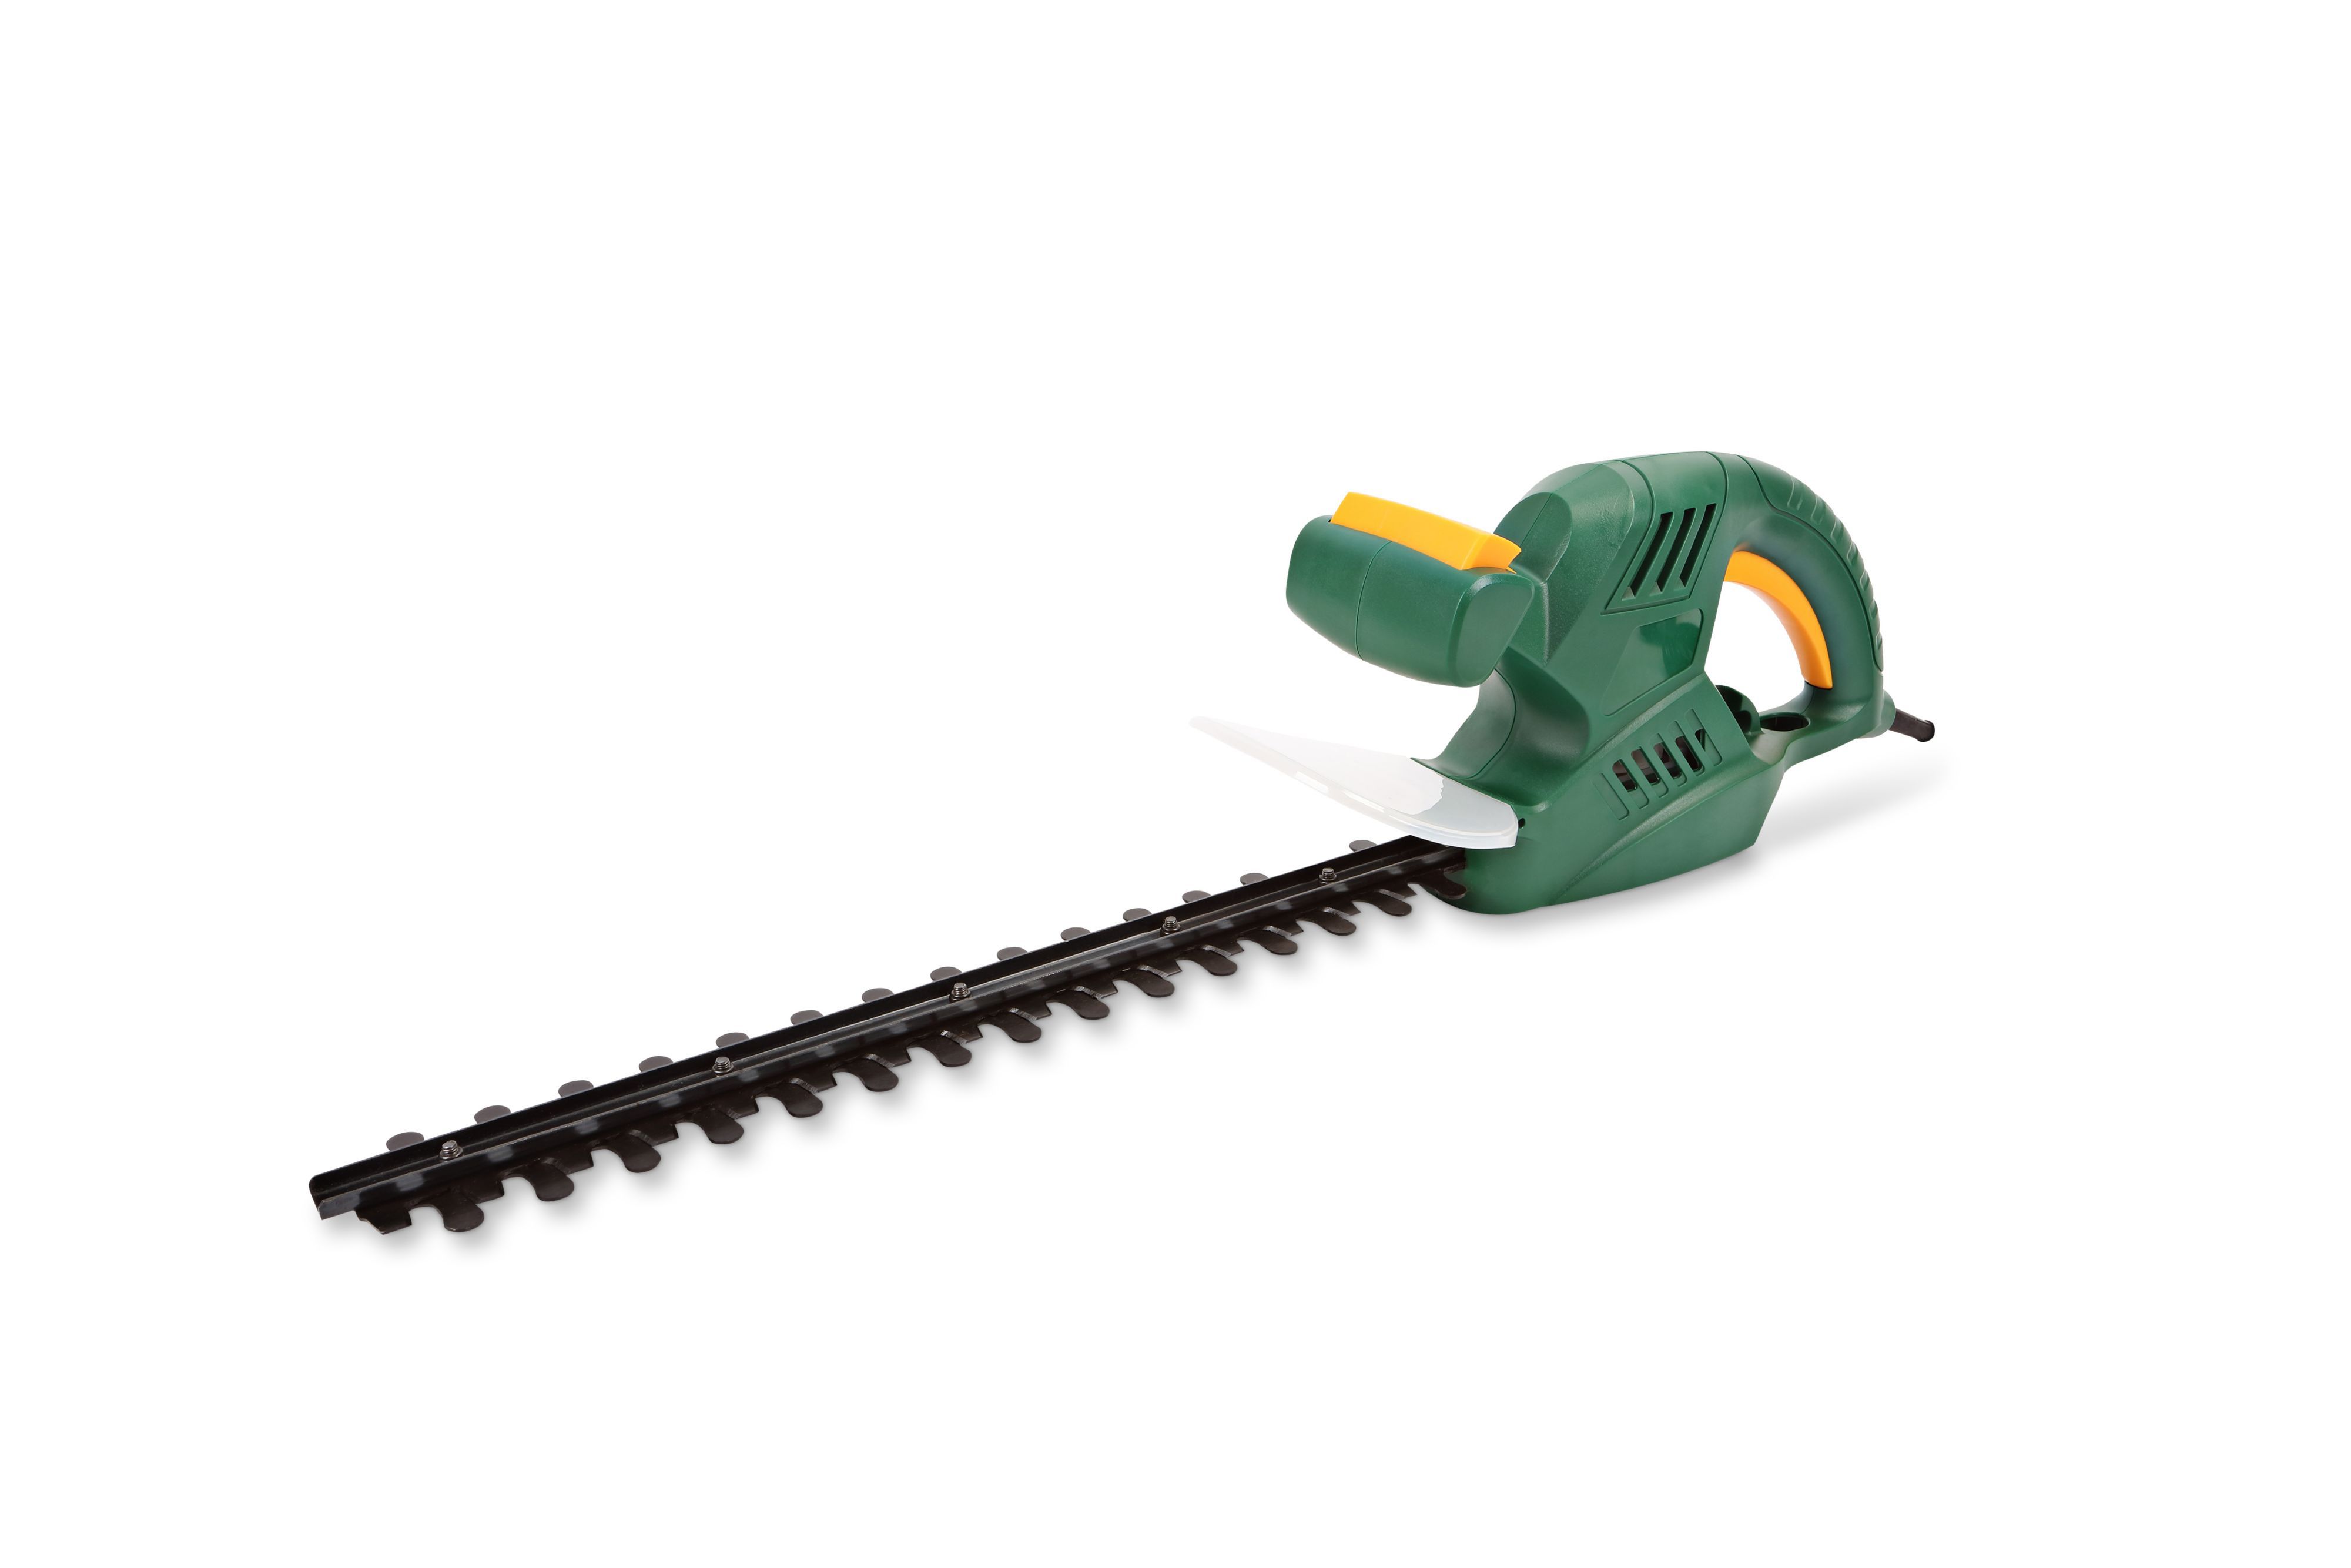 corded hedge trimmer